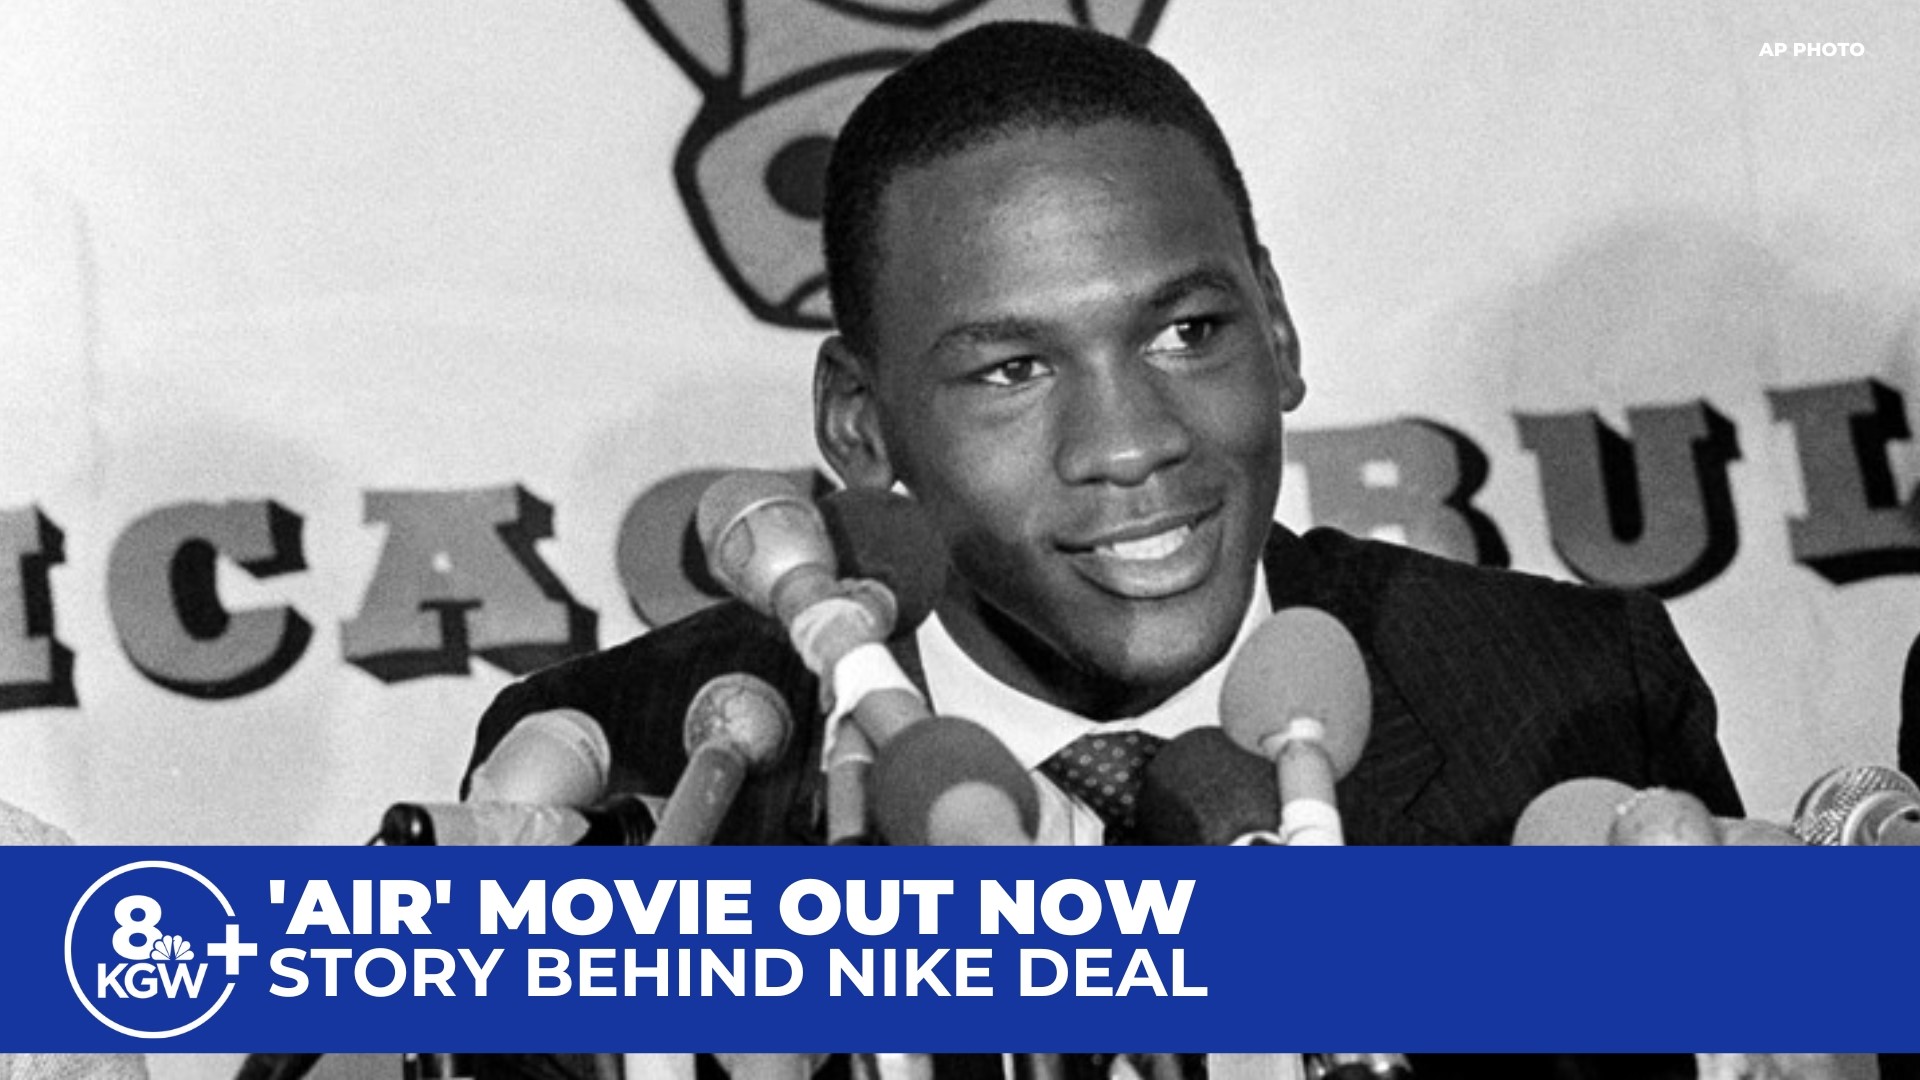 "Air" is based on the true story of the historic Nike deal with Michael Jordan that brought us Air Jordans. It was Sonny Vaccaro who made that deal.